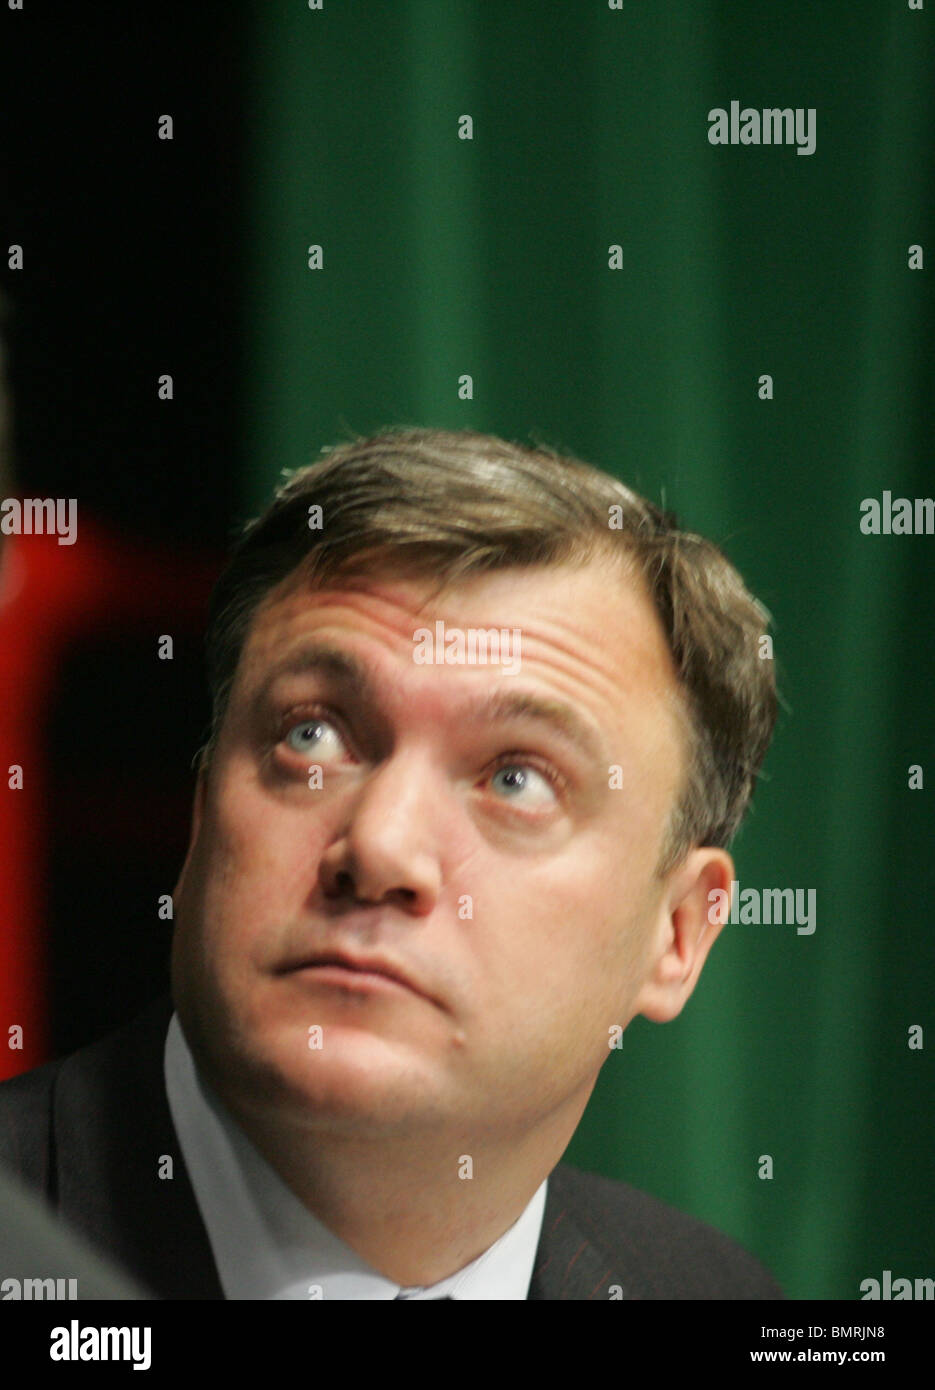 Ed Balls is the Labour and Co-op Member of Parliament for the Morley and Outwood constituency. Stock Photo